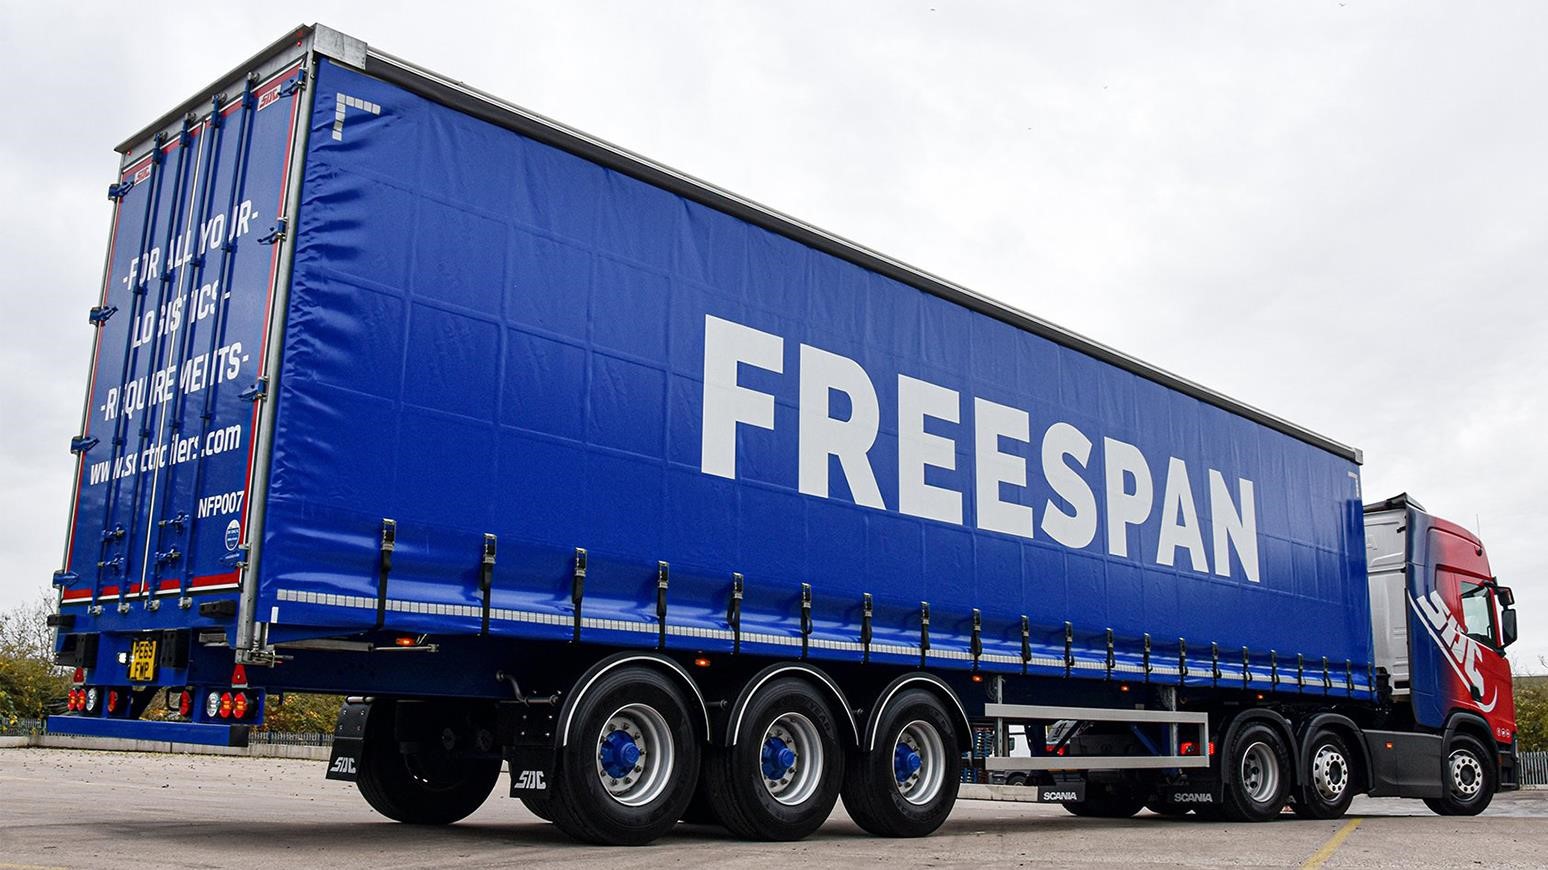 SDC Officially Launches Its Freespan Curtainsider Trailer In The United Kingdom